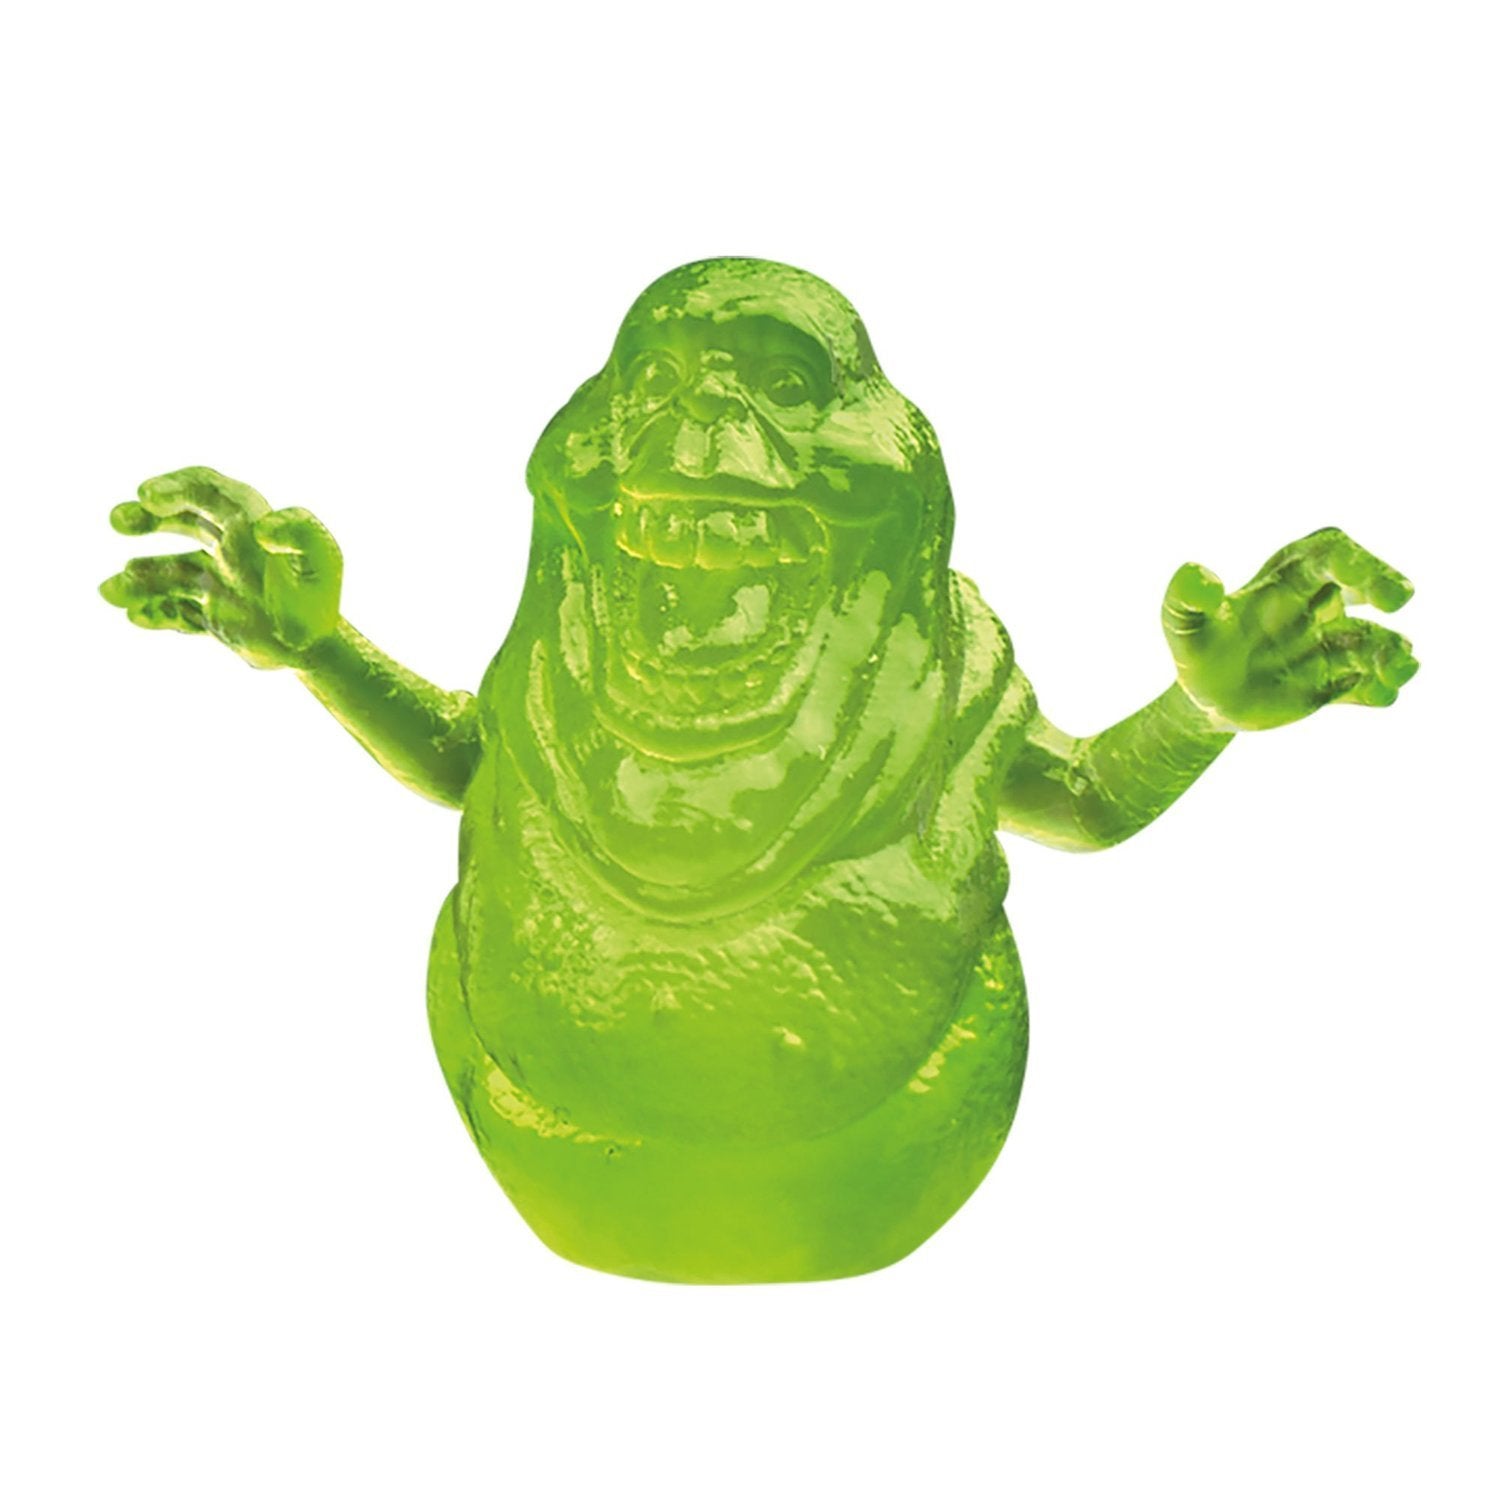 Hasbro - Ghostbusters X Transformers Generations Collaborative - Ecto-1 Ectotron - Marvelous Toys